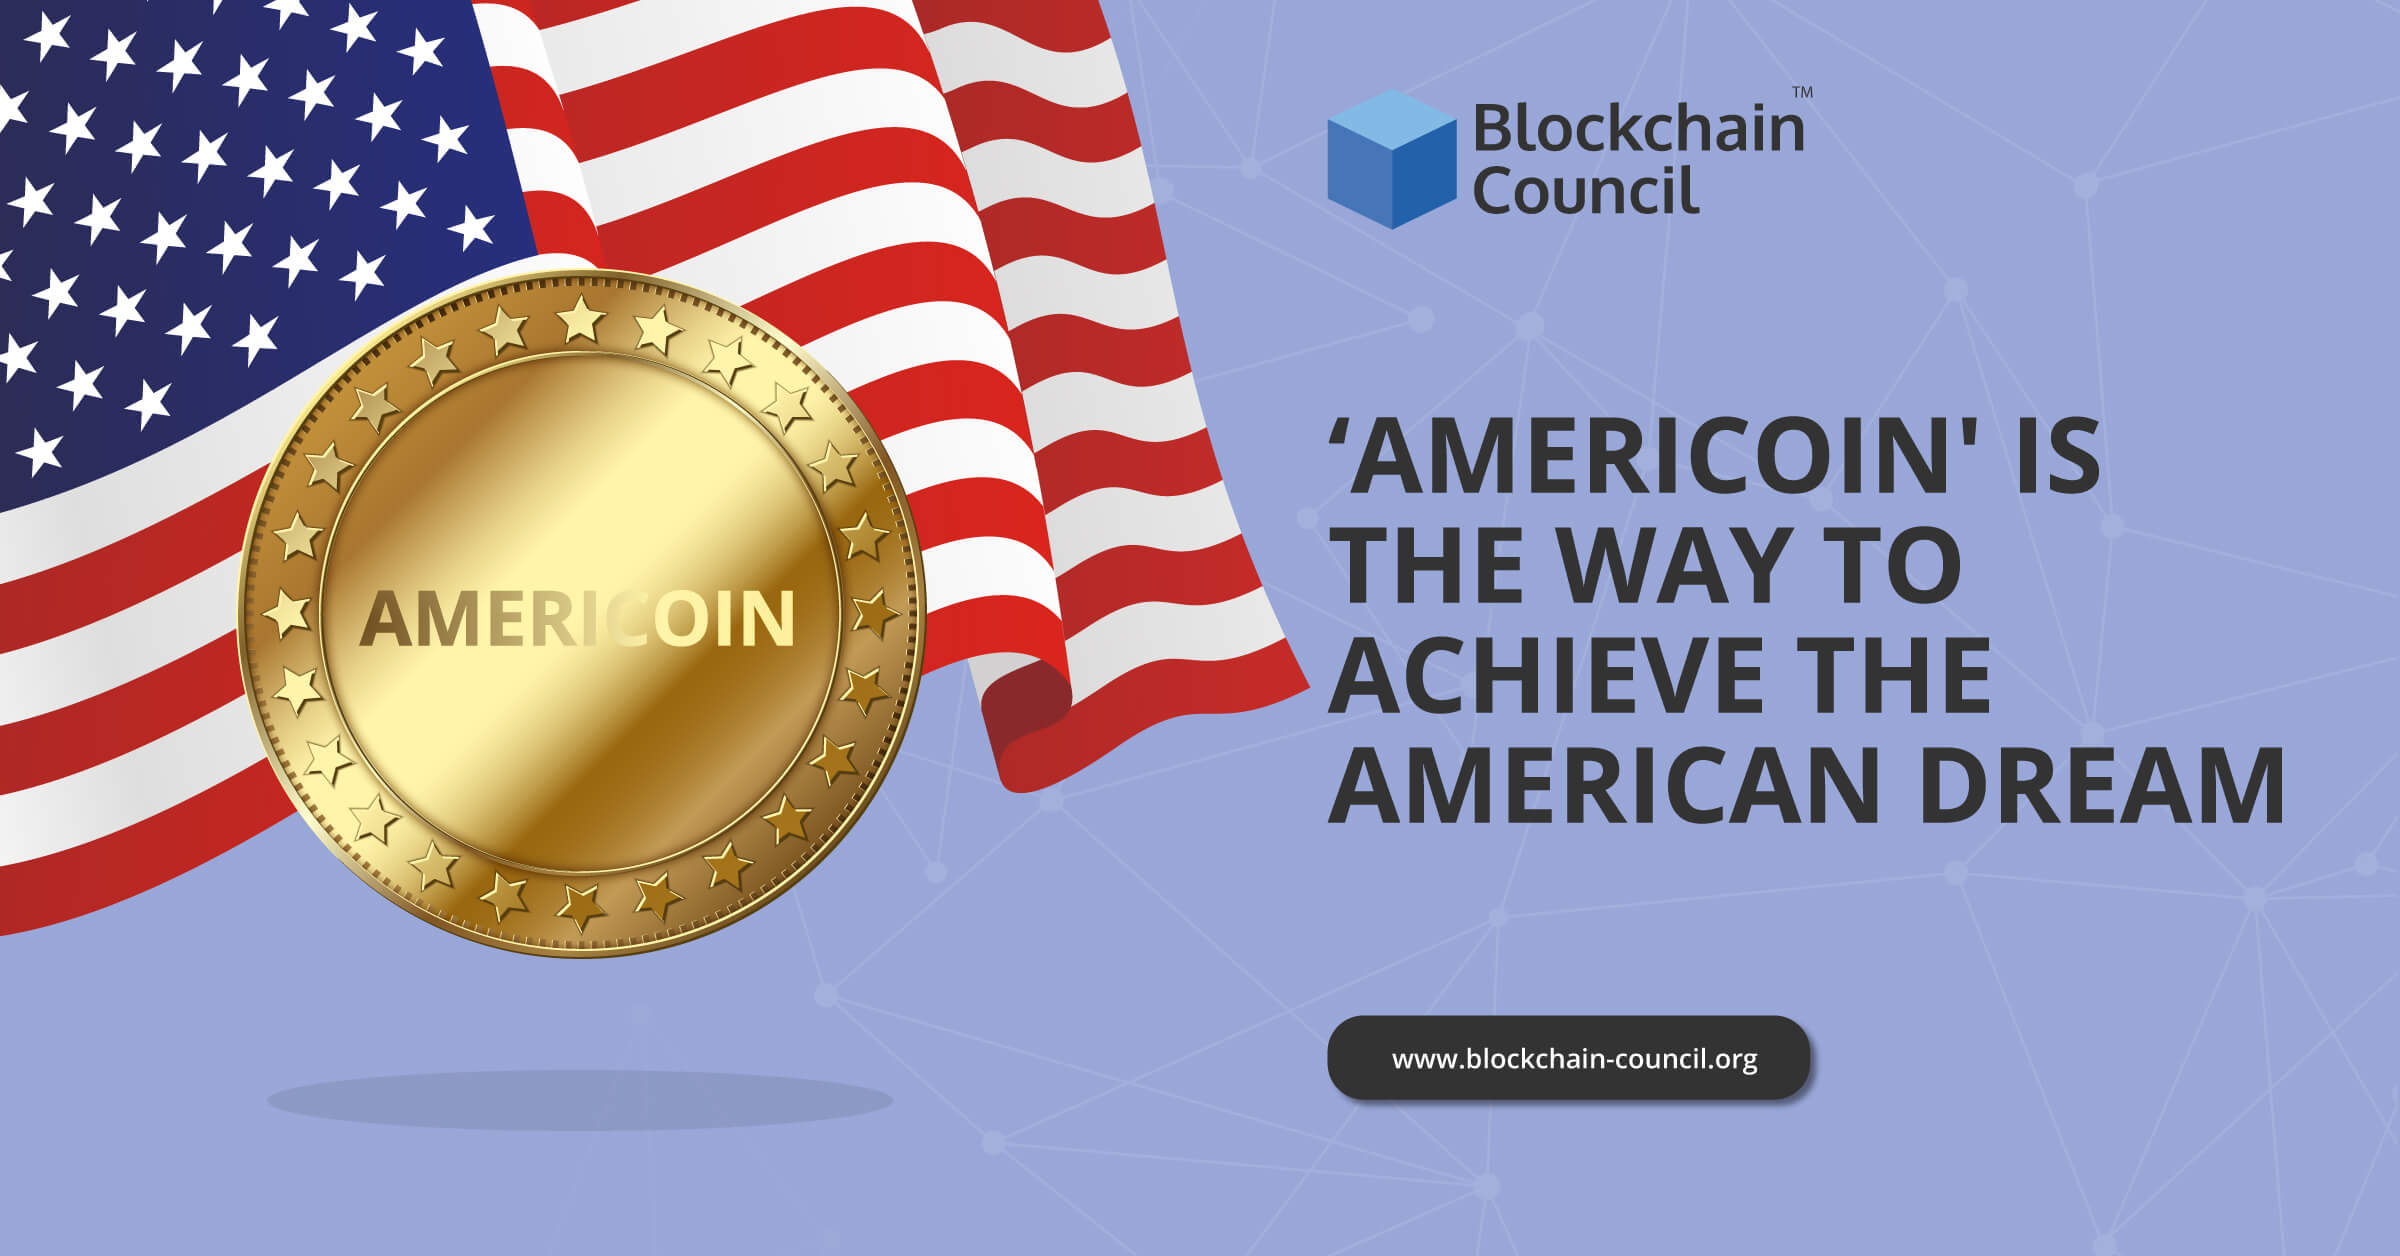 ‘Americoin’ is the way to Achieve the American Dream